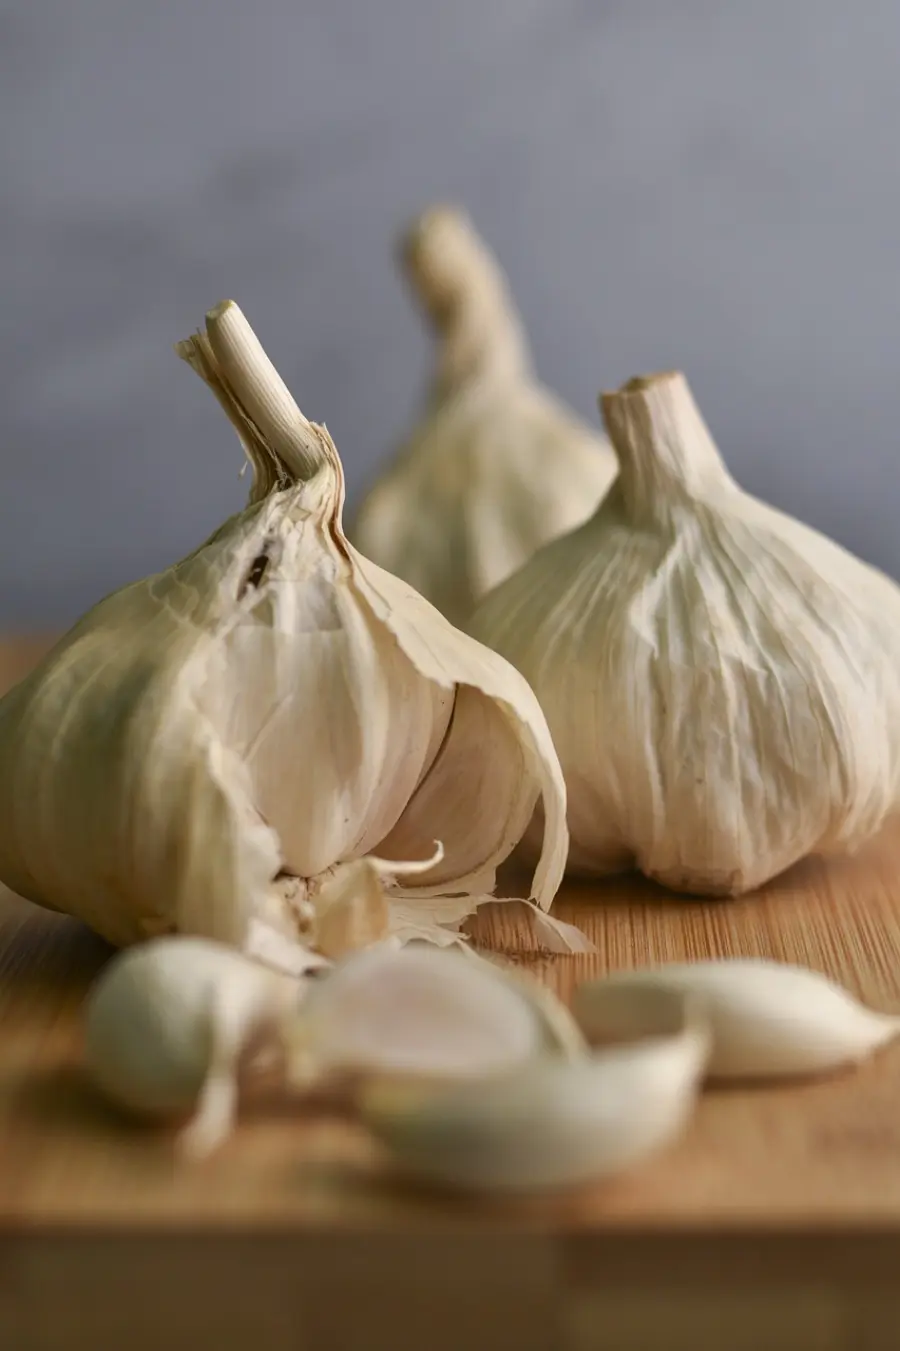 Fresh garlic bulbs with cloves partially peeled, resting on a wooden chopping board, showcasing essential ingredients in culinary preparation